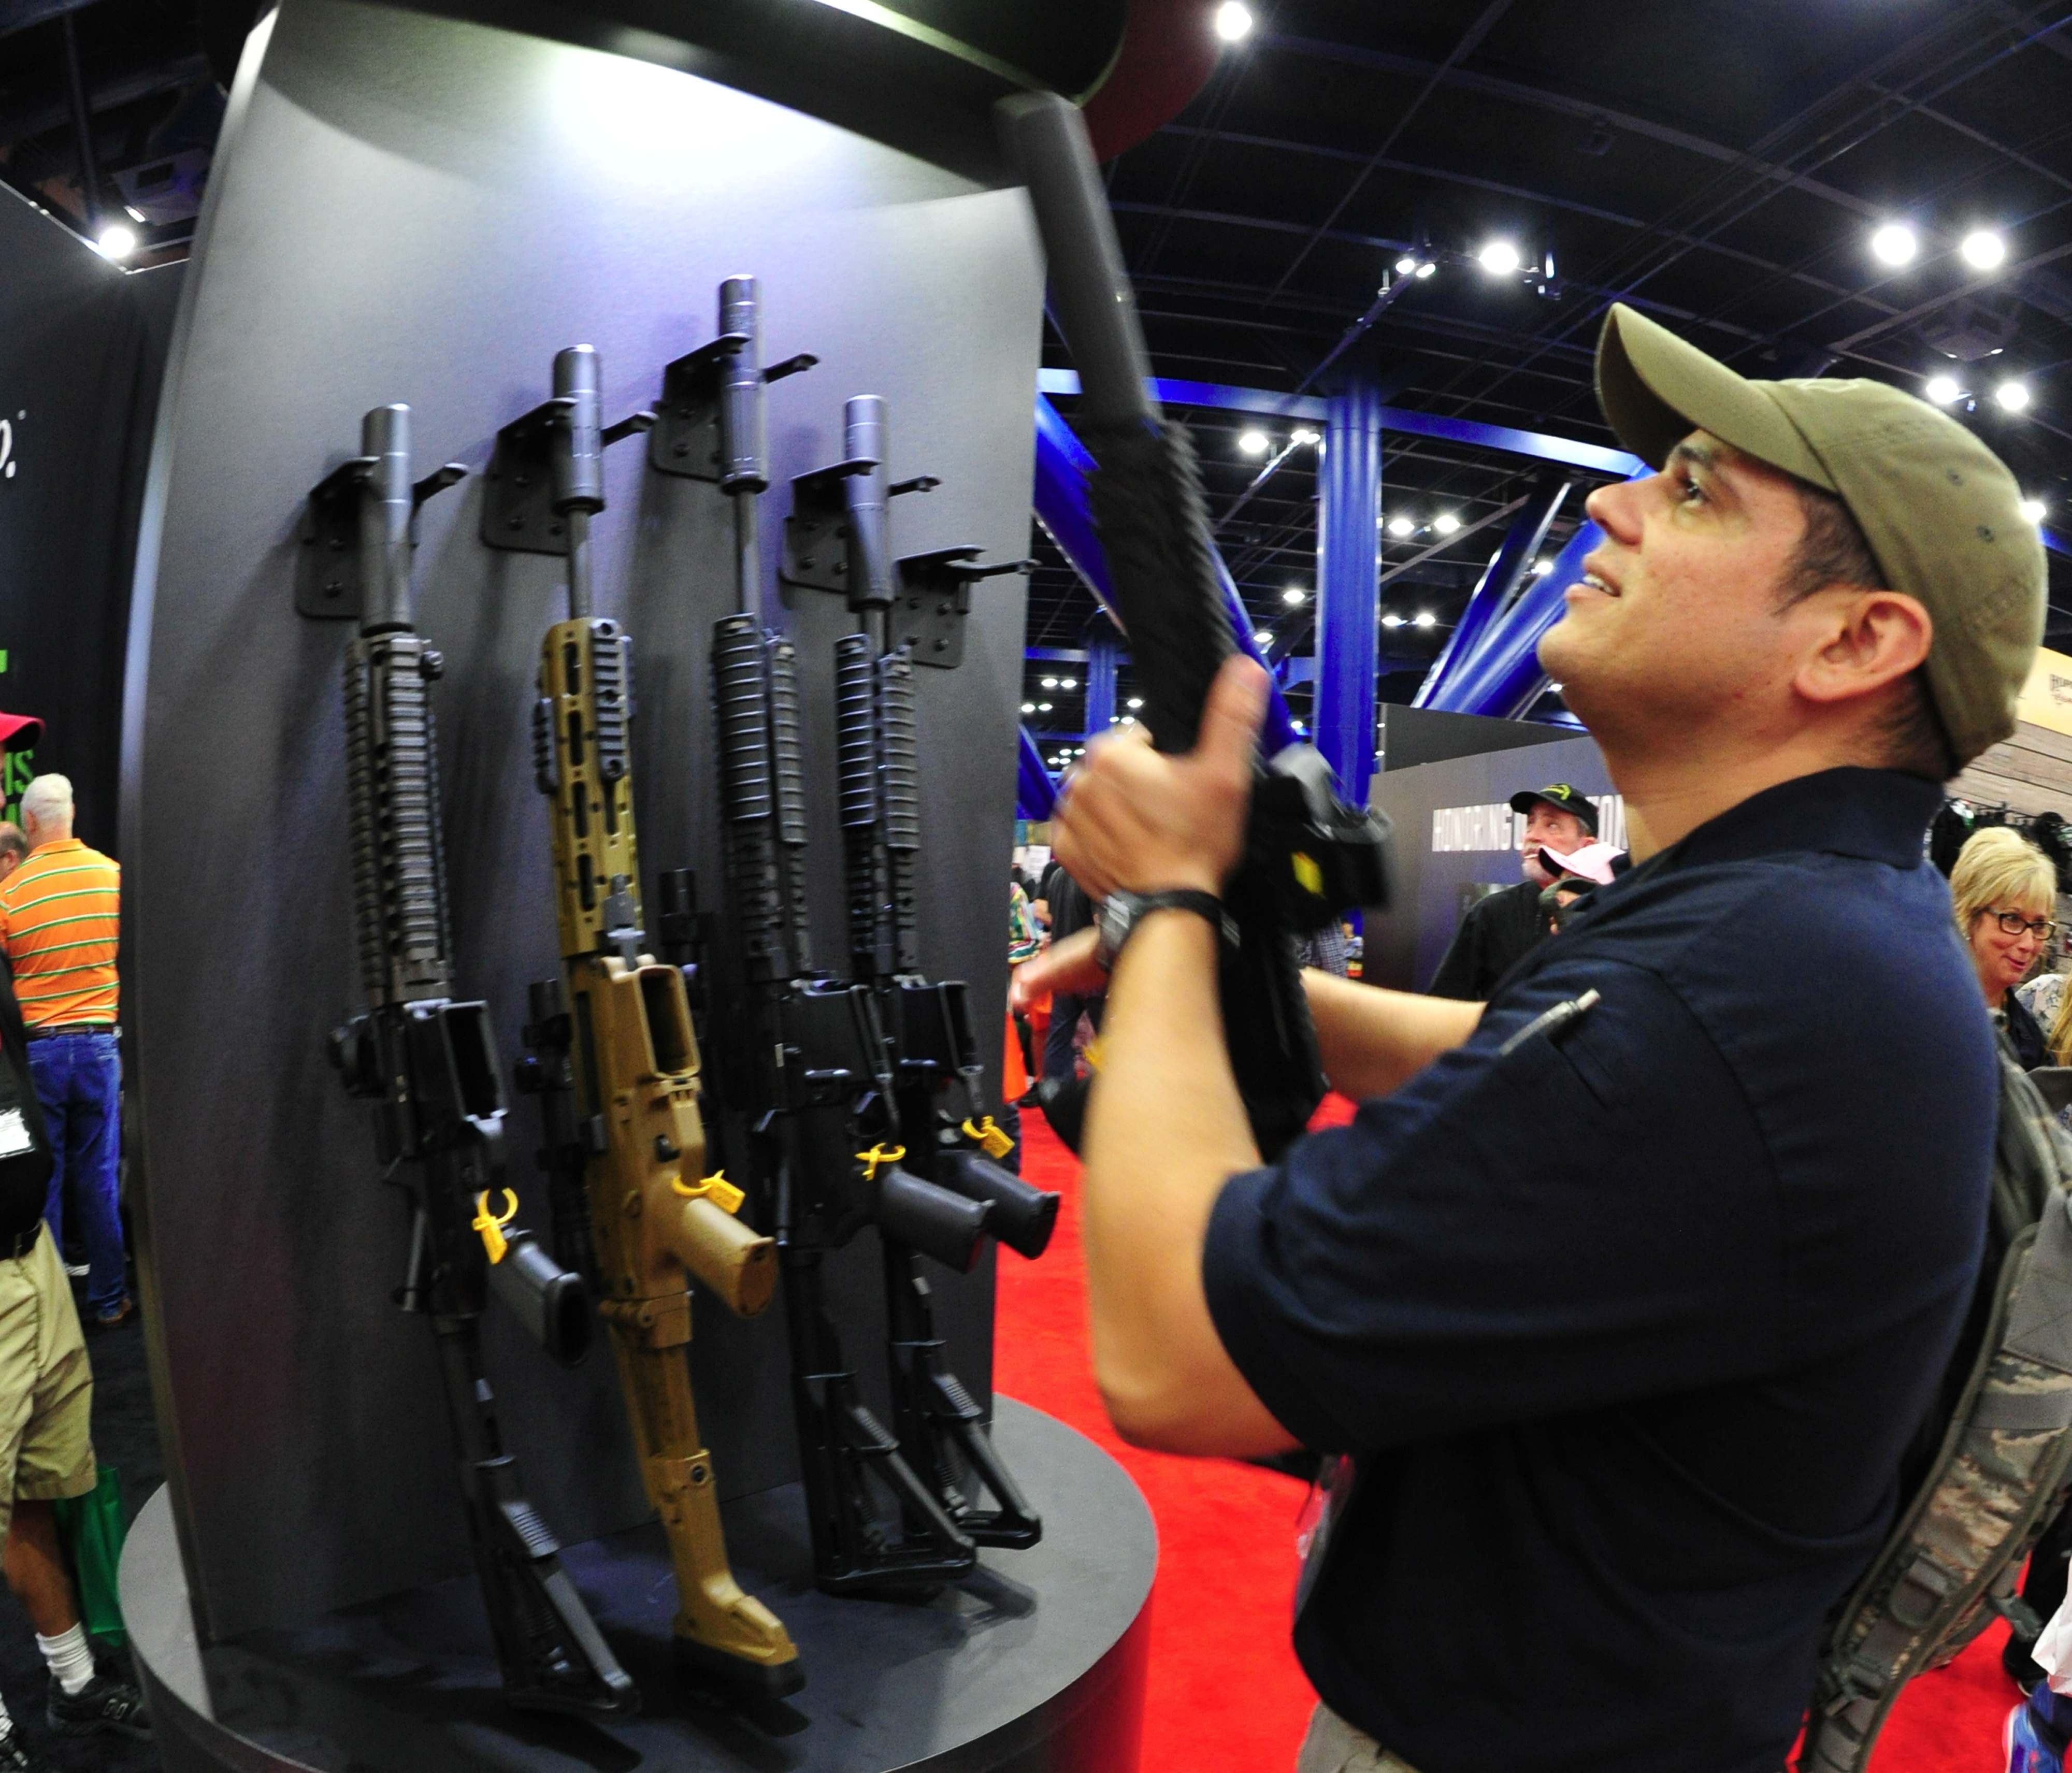 A convention goer picks up a weapon equipped with a silencer during the 142nd annual National Rifle Association(NRA) Convention at the George R. Brown Convention Center May 4, 2013 in Houston, Texas. (KAREN BLEIER&mdash;AFP/Getty Images)